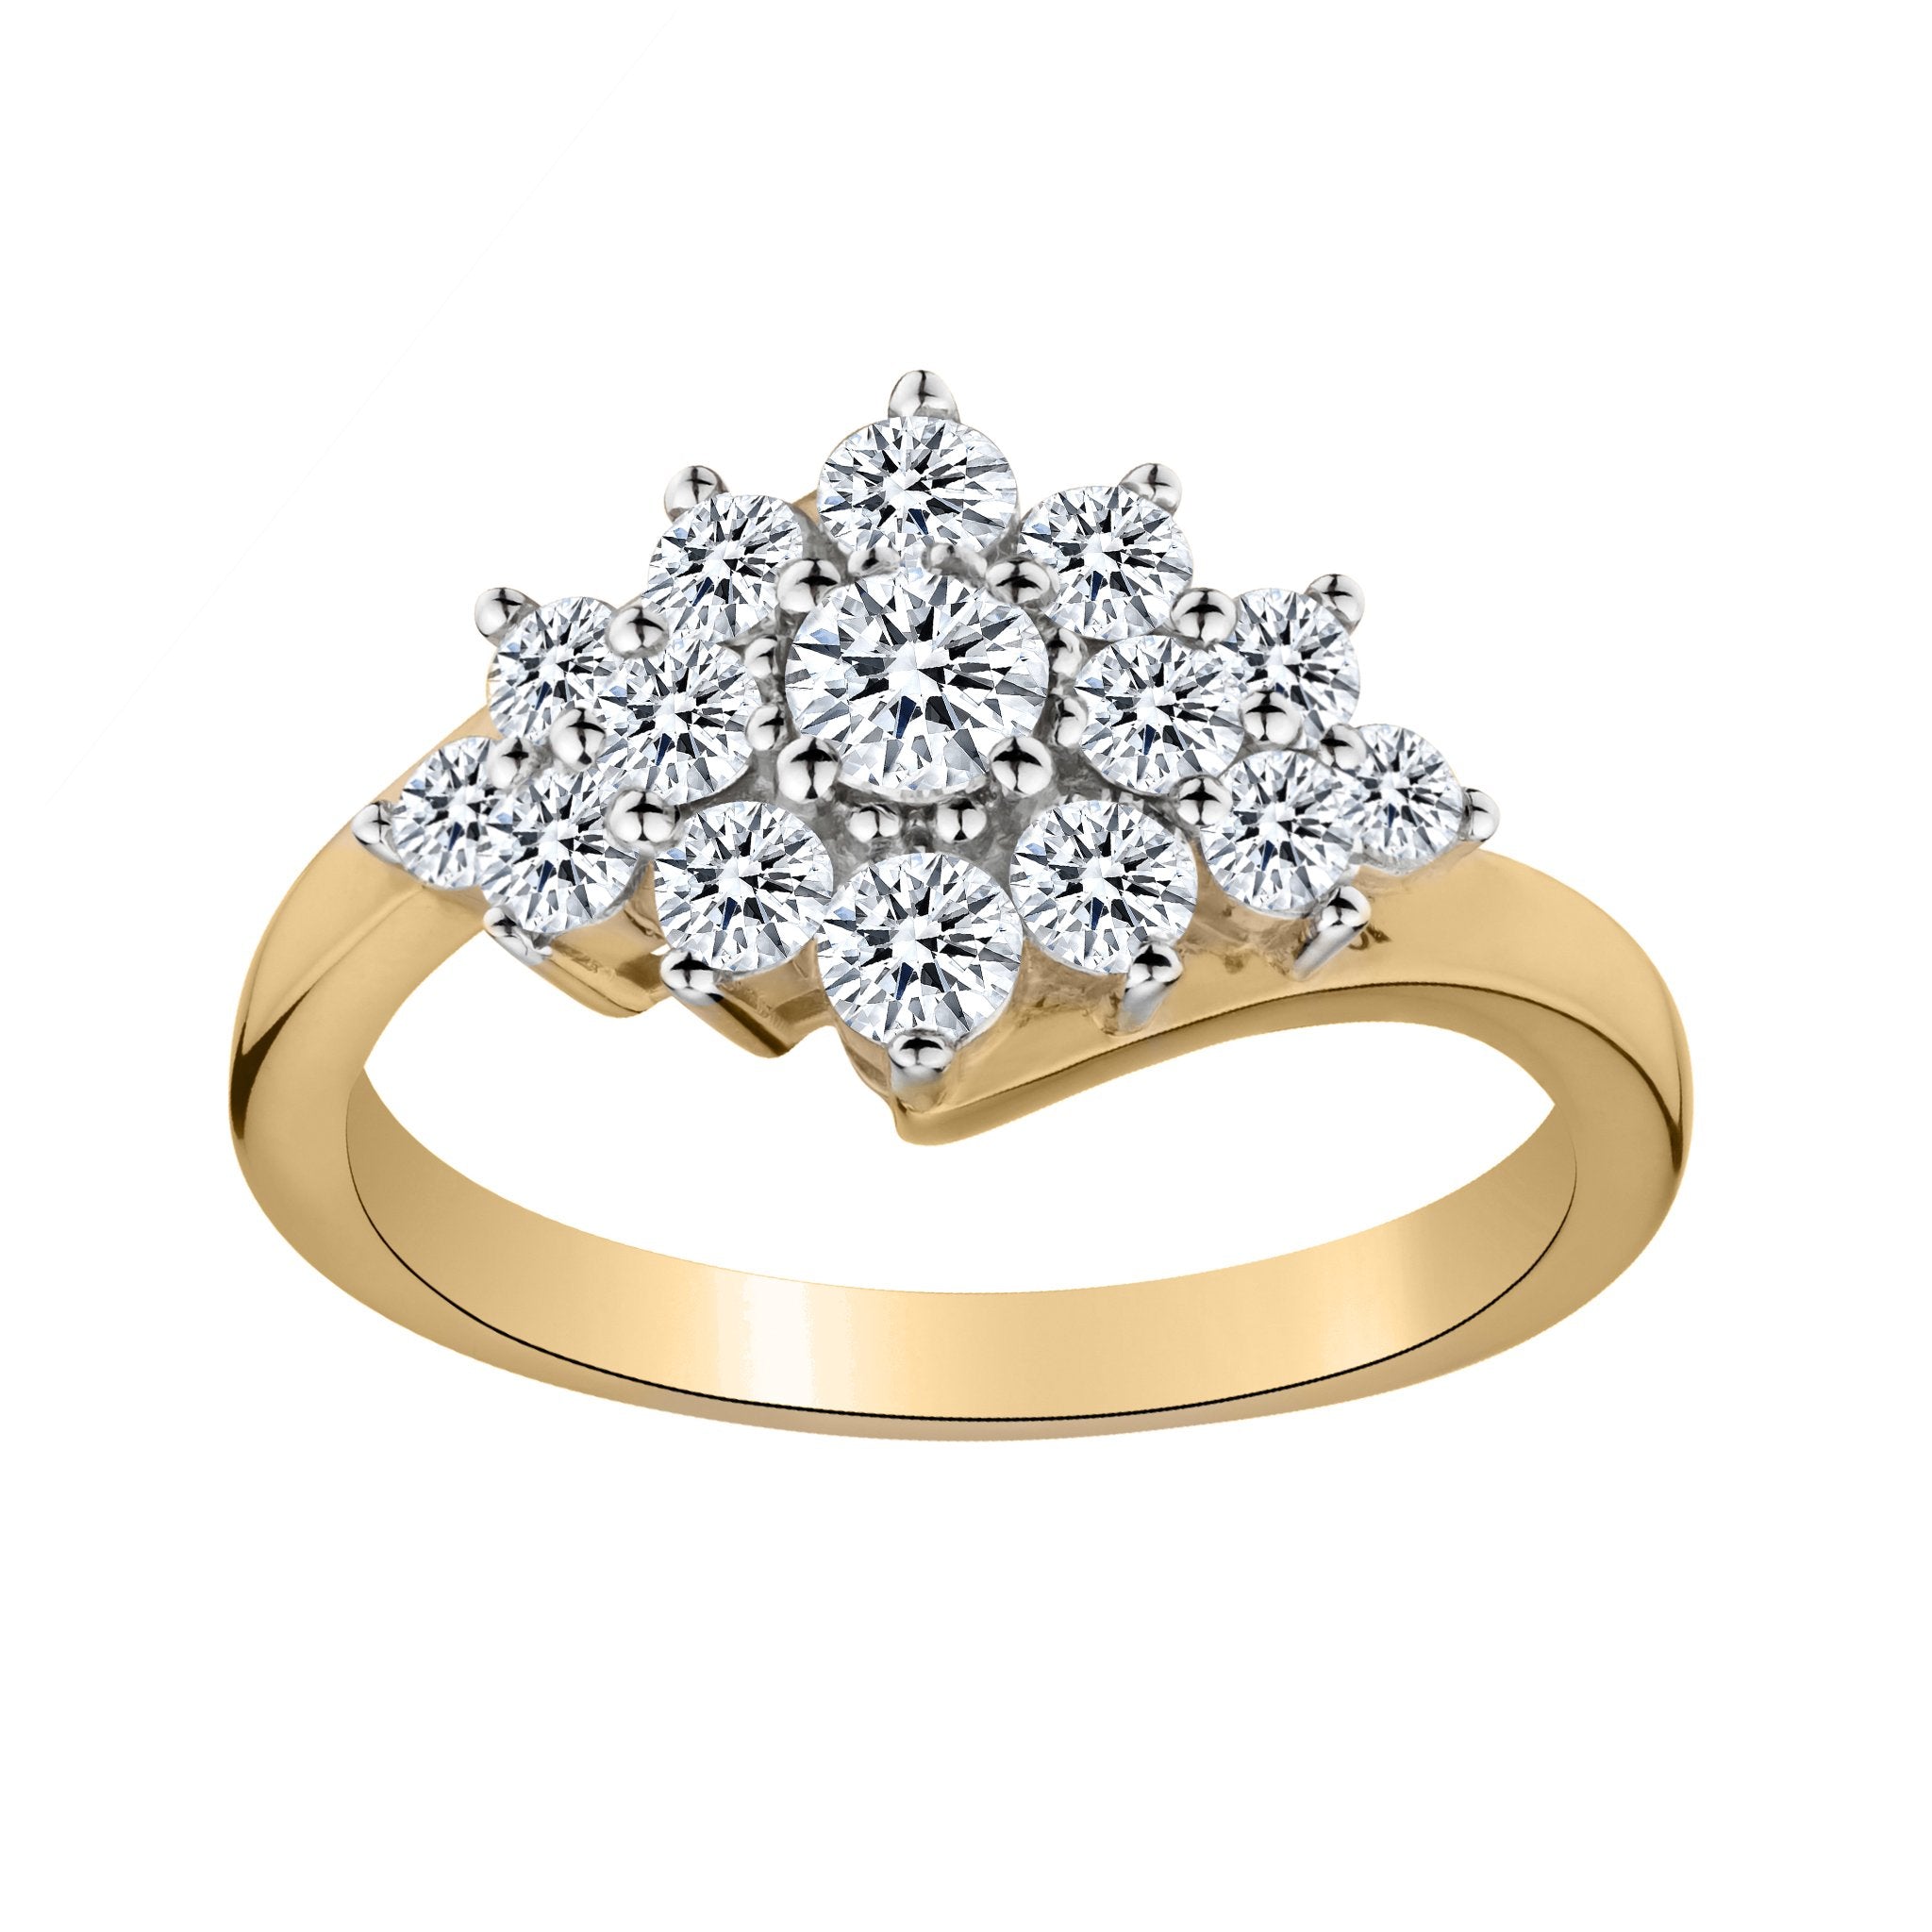 1.00 CARAT DIAMOND RING, 10kt YELLOW GOLD...................NOW - Griffin Jewellery Designs